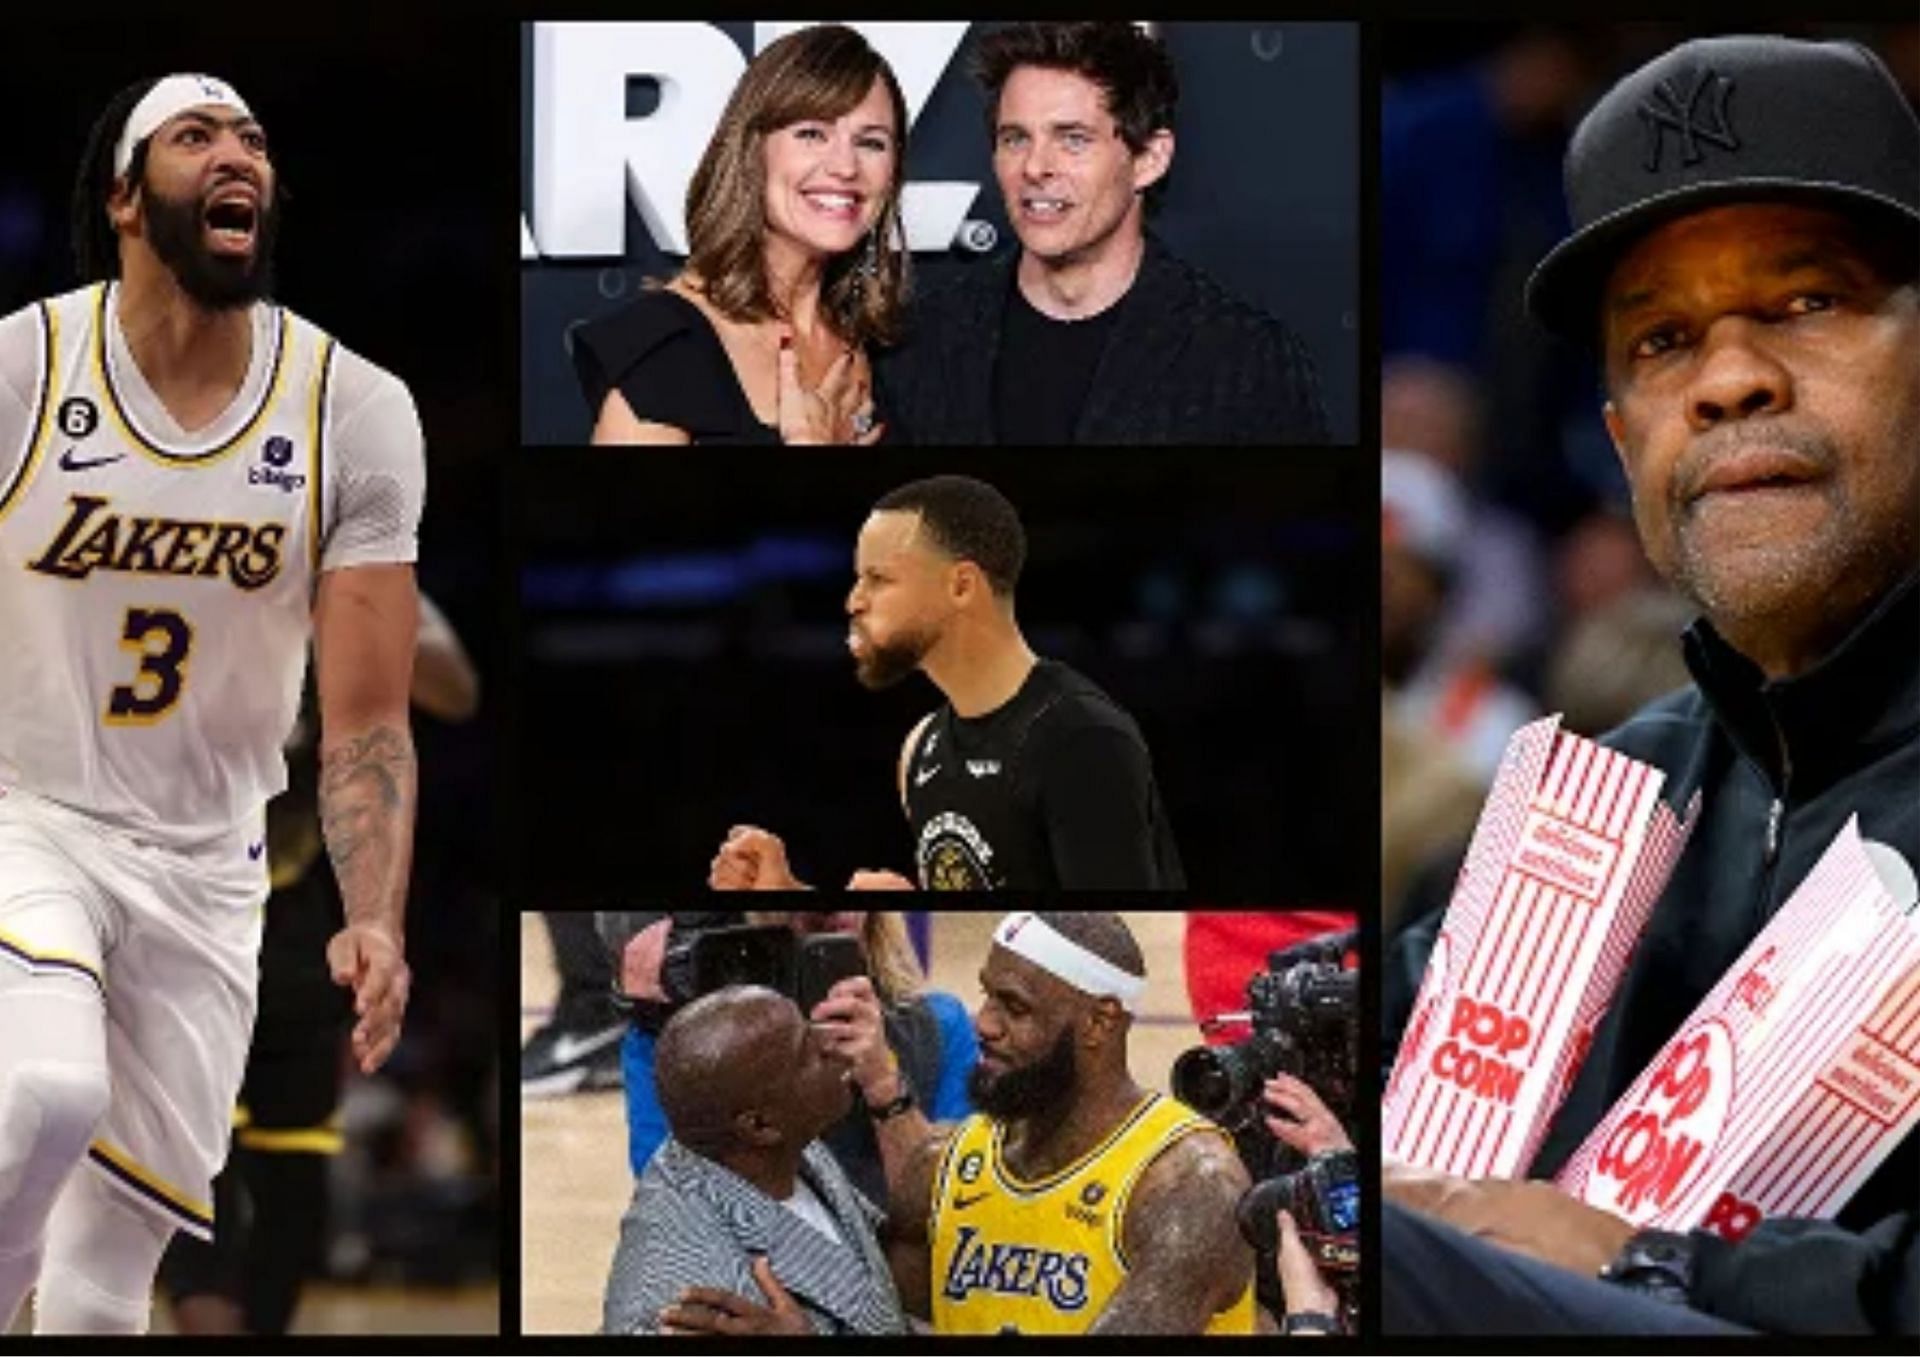 The Golden State Warriors and the LA Lakers played in front of a star-studded crowd. [photo: Essentially Sports]